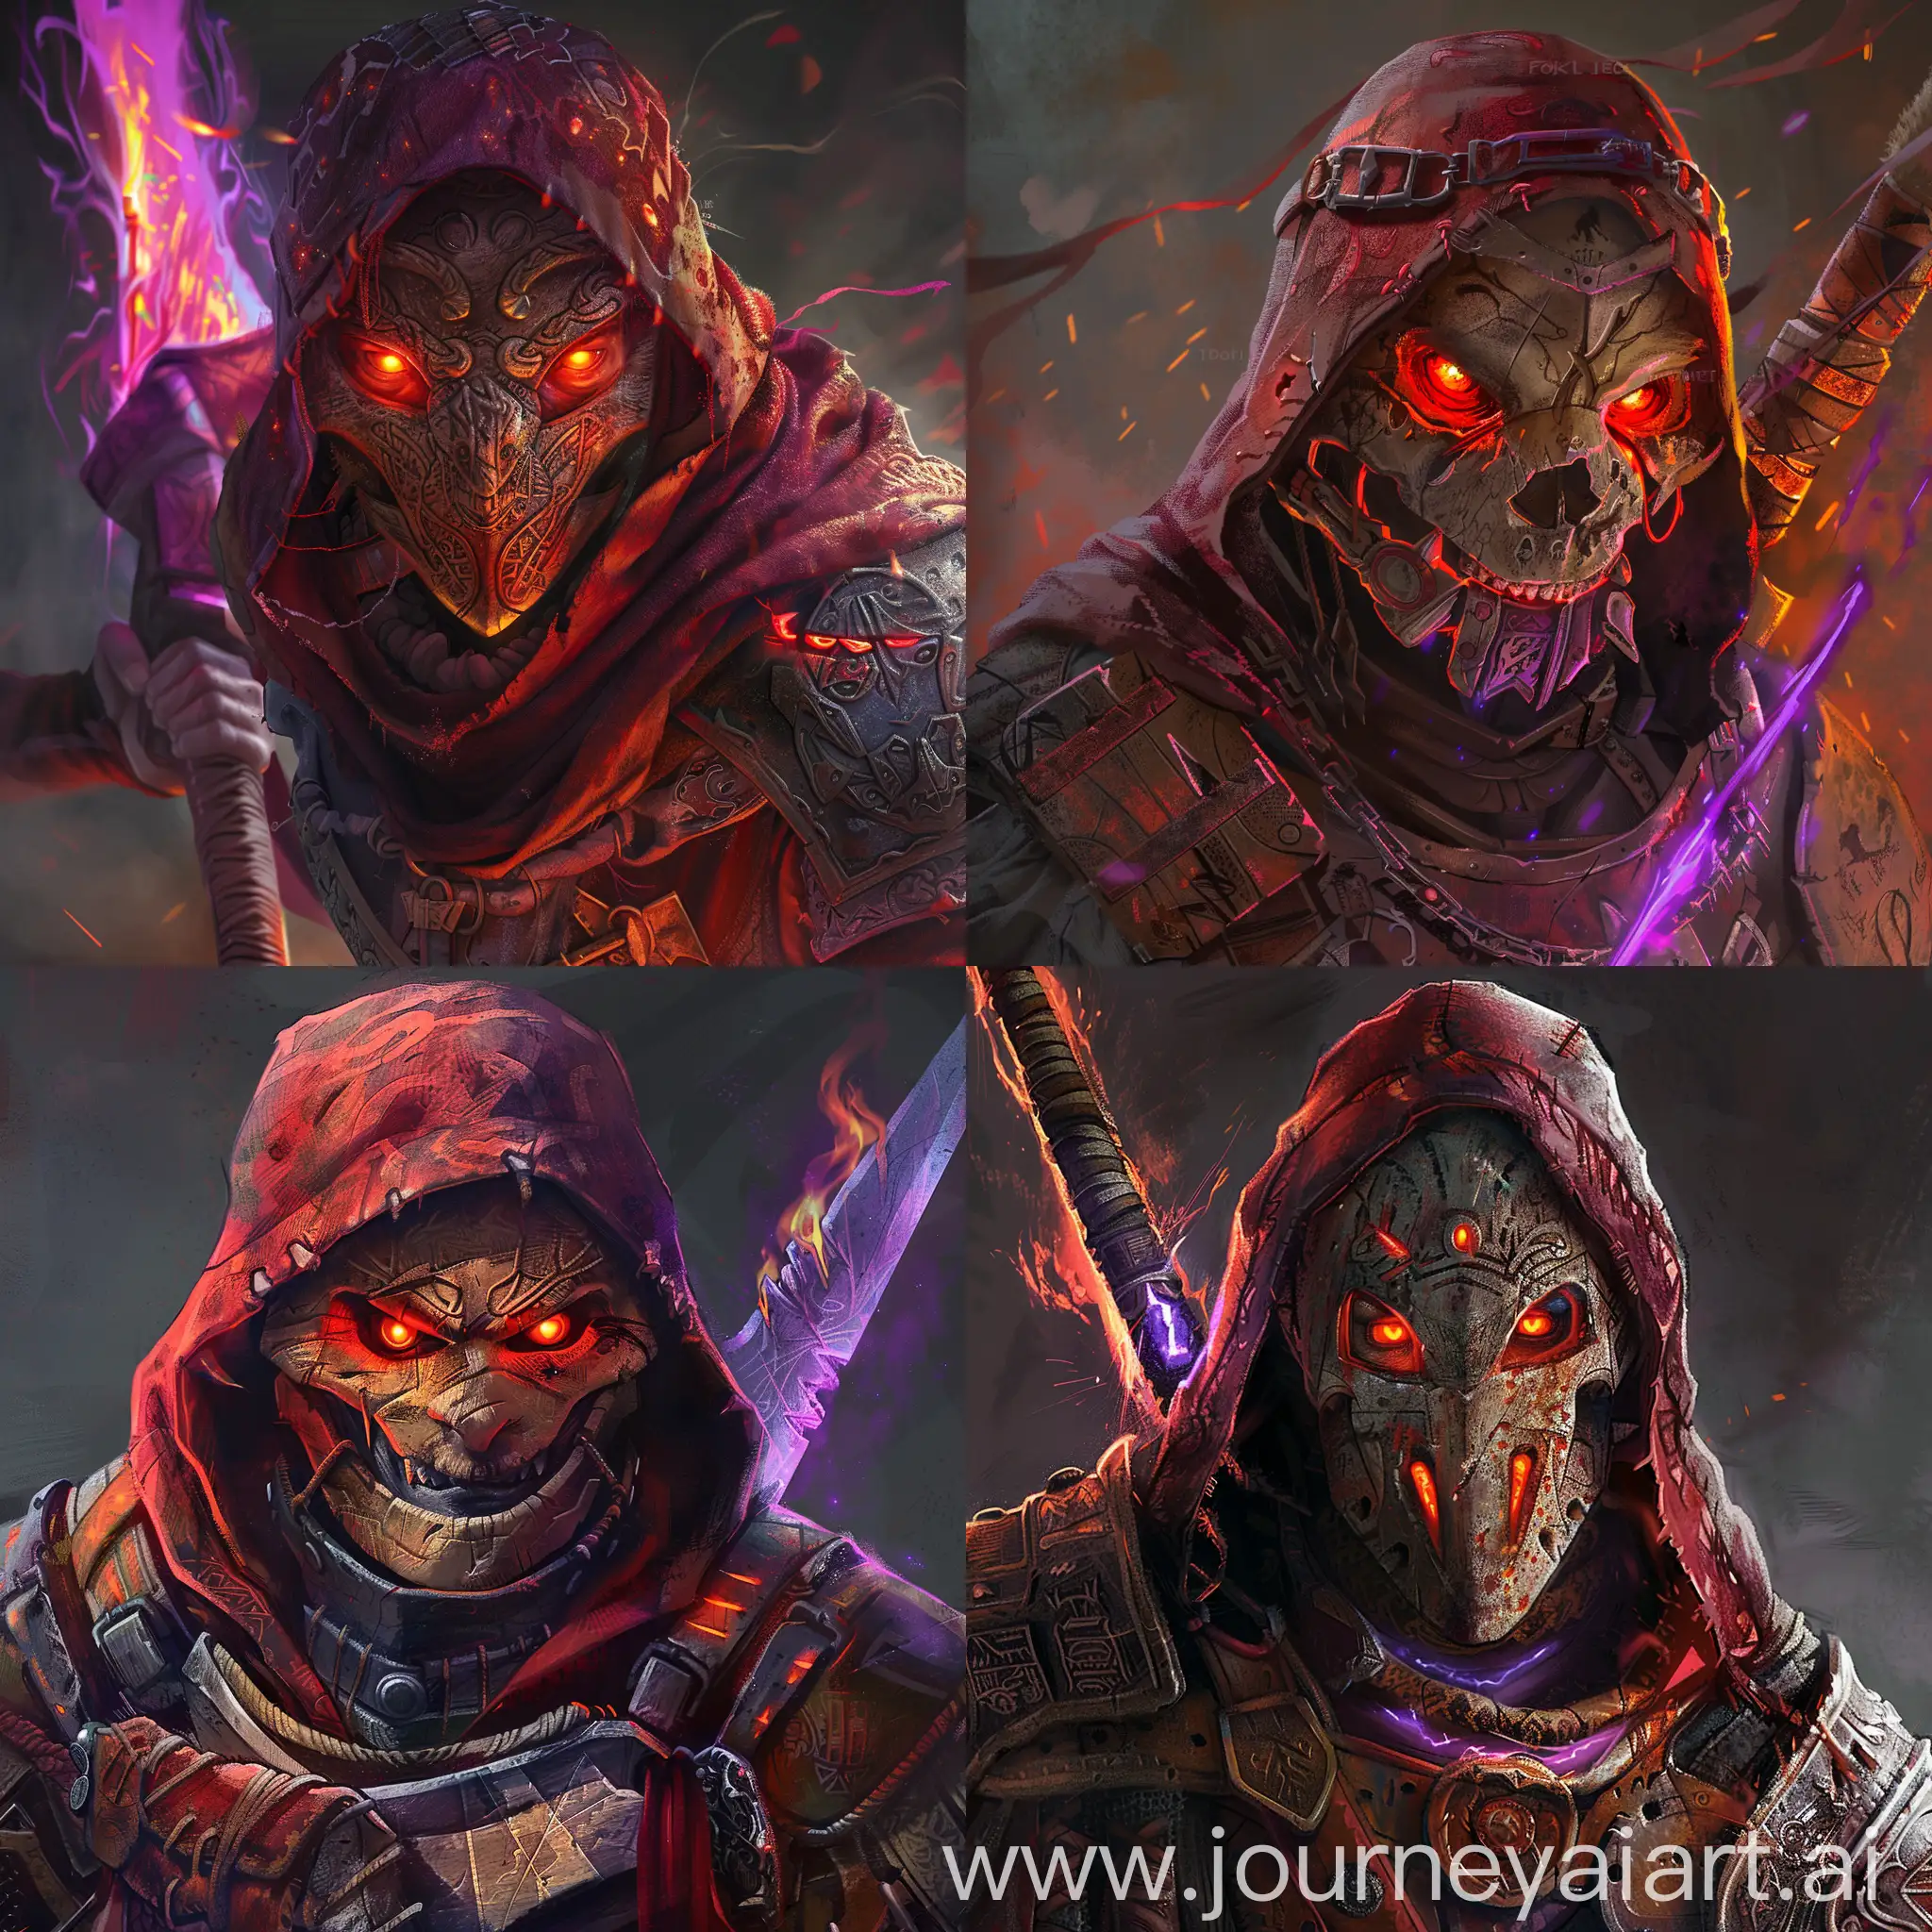   Create an awe-inspiring digital painting of Jack of Blades from the Fable video game franchise. Jack is shown with a ancient looking mask wearing a red hood with ancient armor underneath it. He has glowing red and orange eyes that make him looking menacing. Inspiration should be drawn from J.R.R. Tolkien's universe.  Jack is seen holding  a large broadsword that glows with a dark purple flame. The artwork should be rendered in ultra-high 8k resolution to capture the essence of the terrifying character